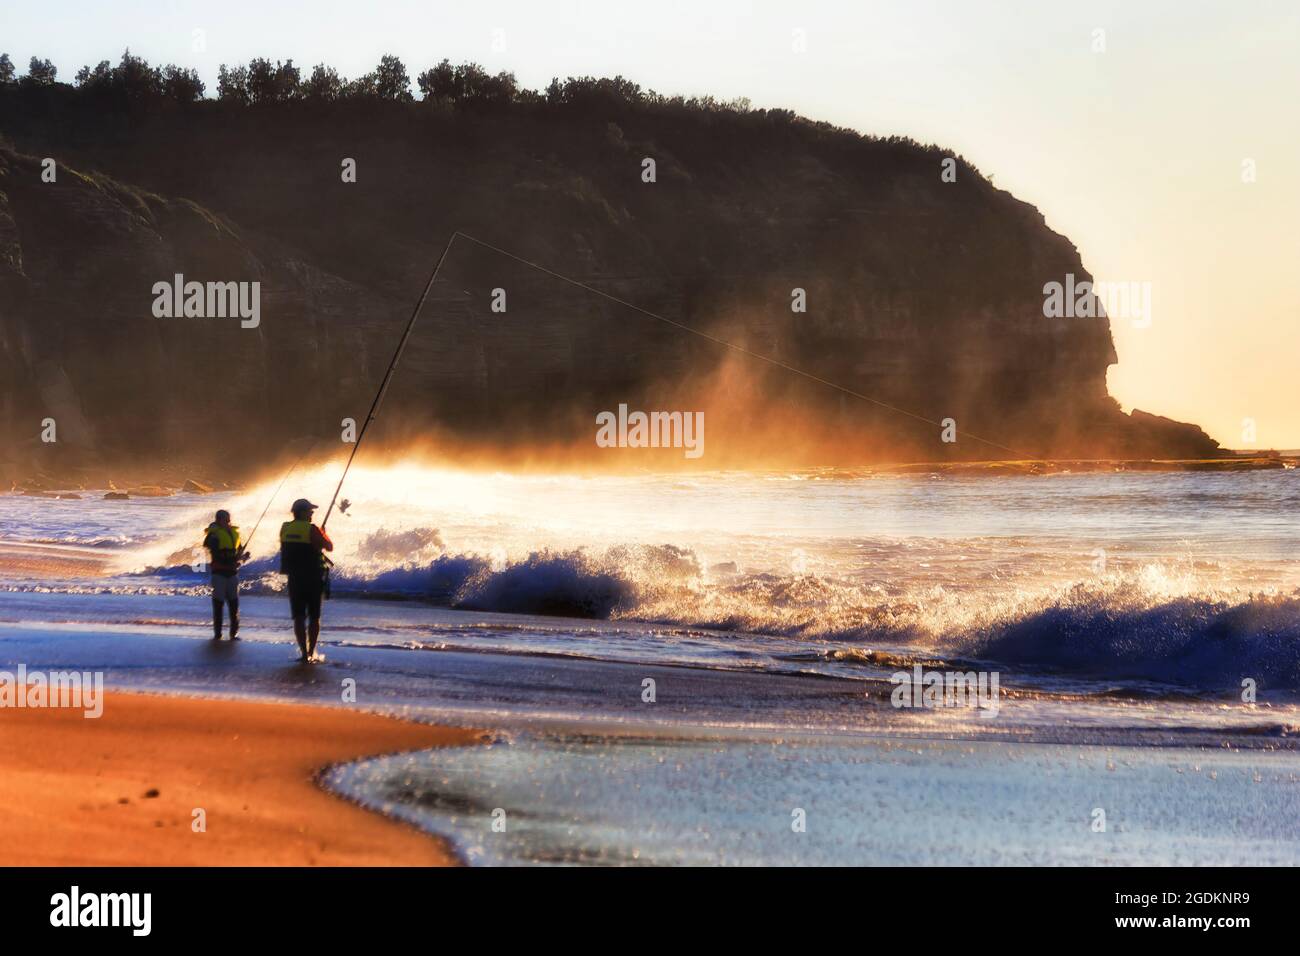 Recreational fly-fishing with rods and strings off Turimetta beach on Sydney Northern beaches - scenic sunrise. Stock Photo